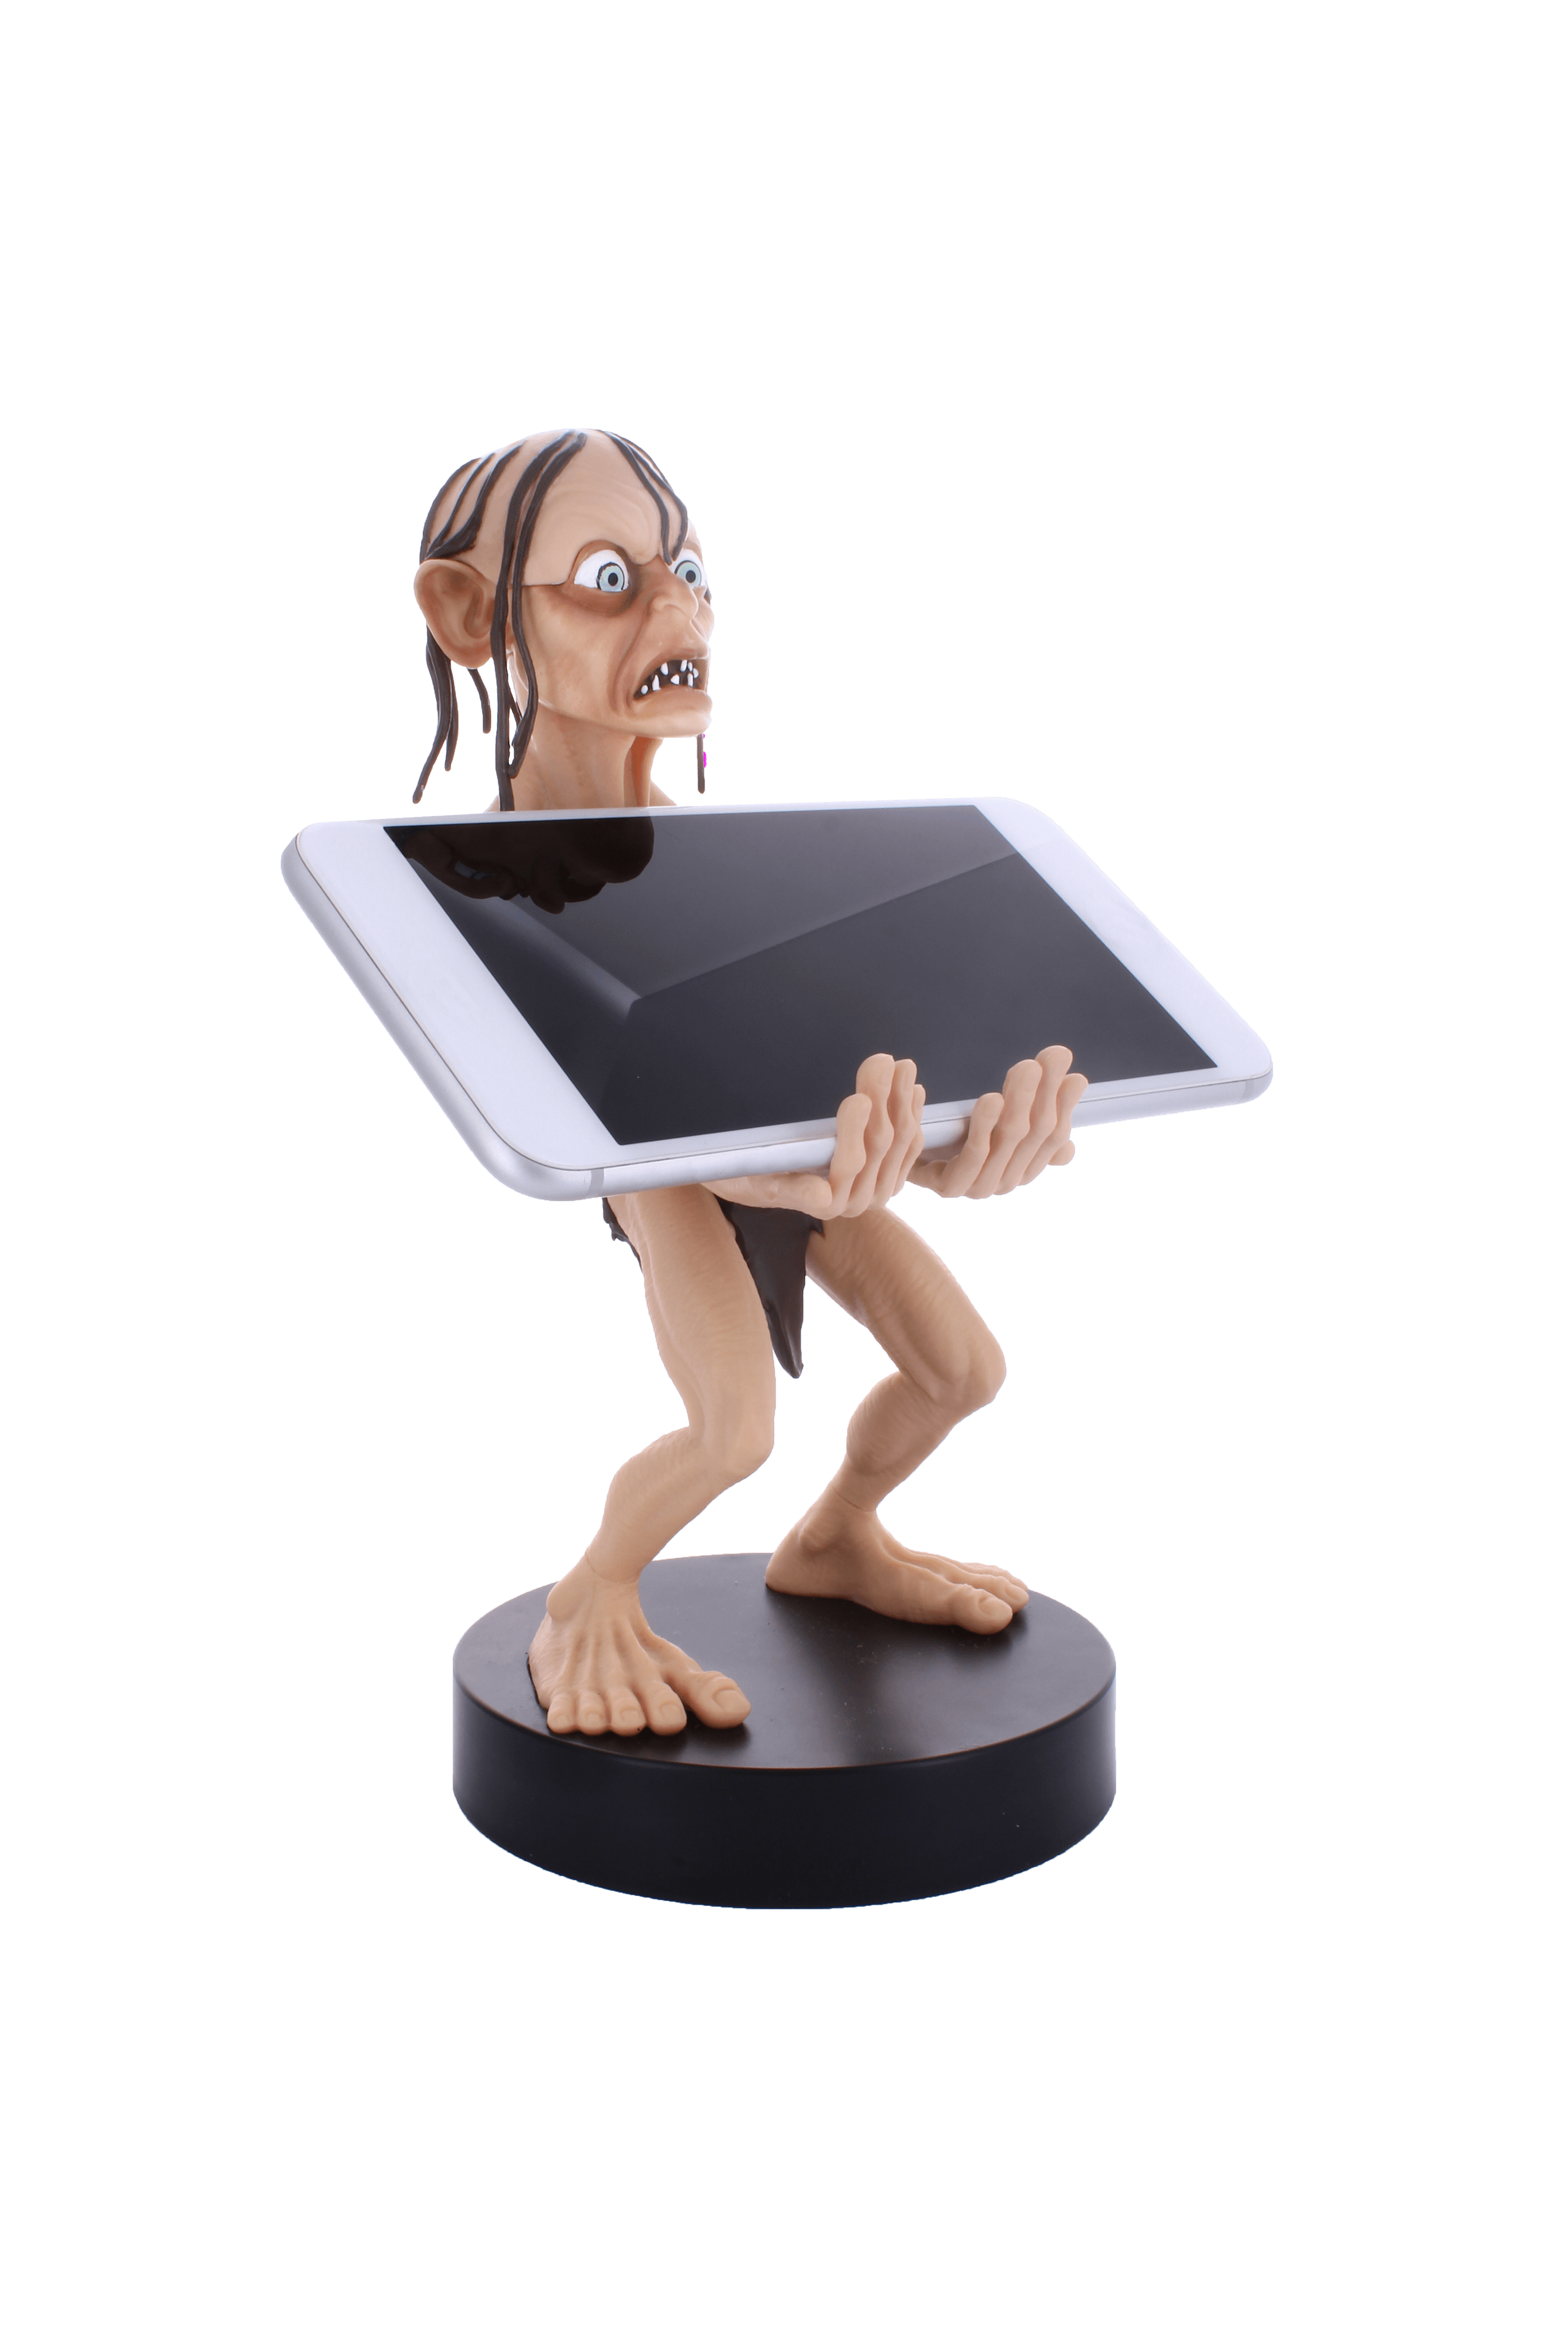 Cable Guys - Lord of the Rings - Gollum - Phone & Controller Holder - The Card Vault